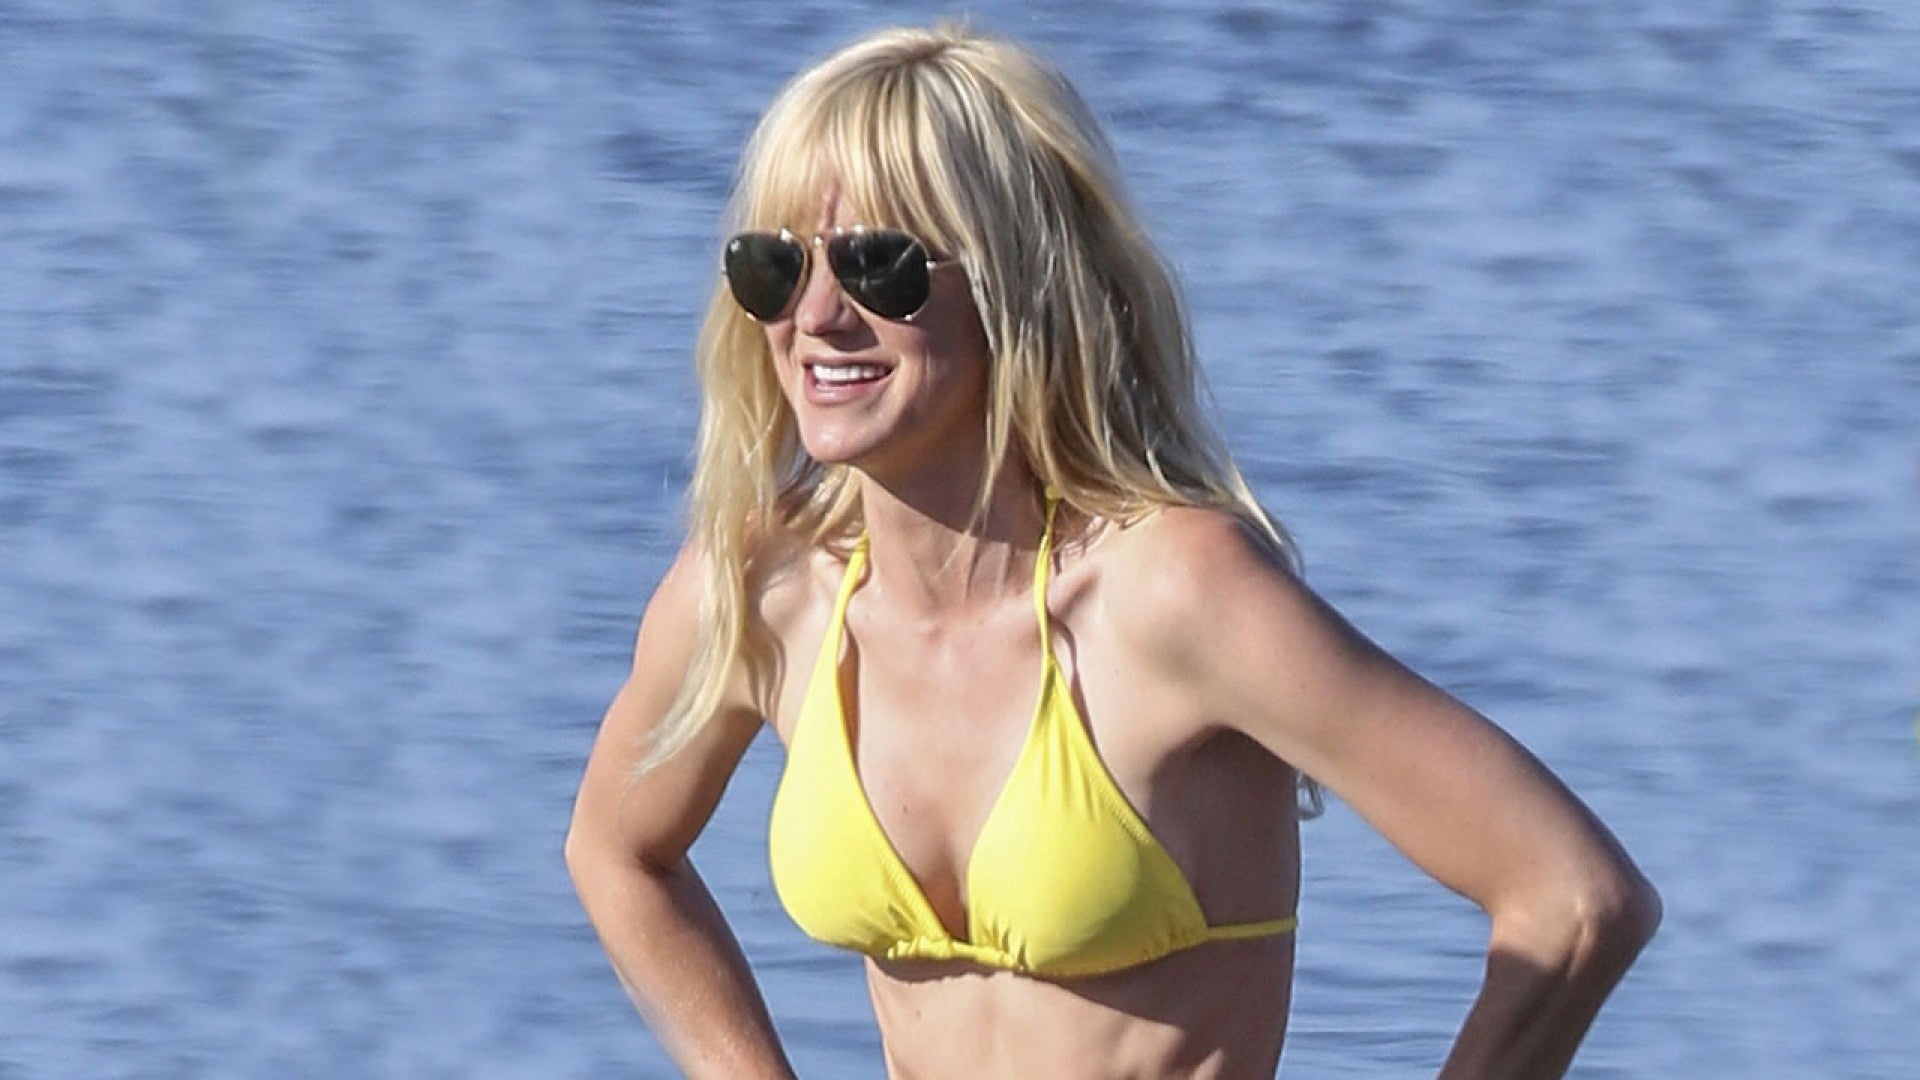 Anna Faris Shows Off Her Fit Figure in Tiny Yellow Bikini on 'Overboar...